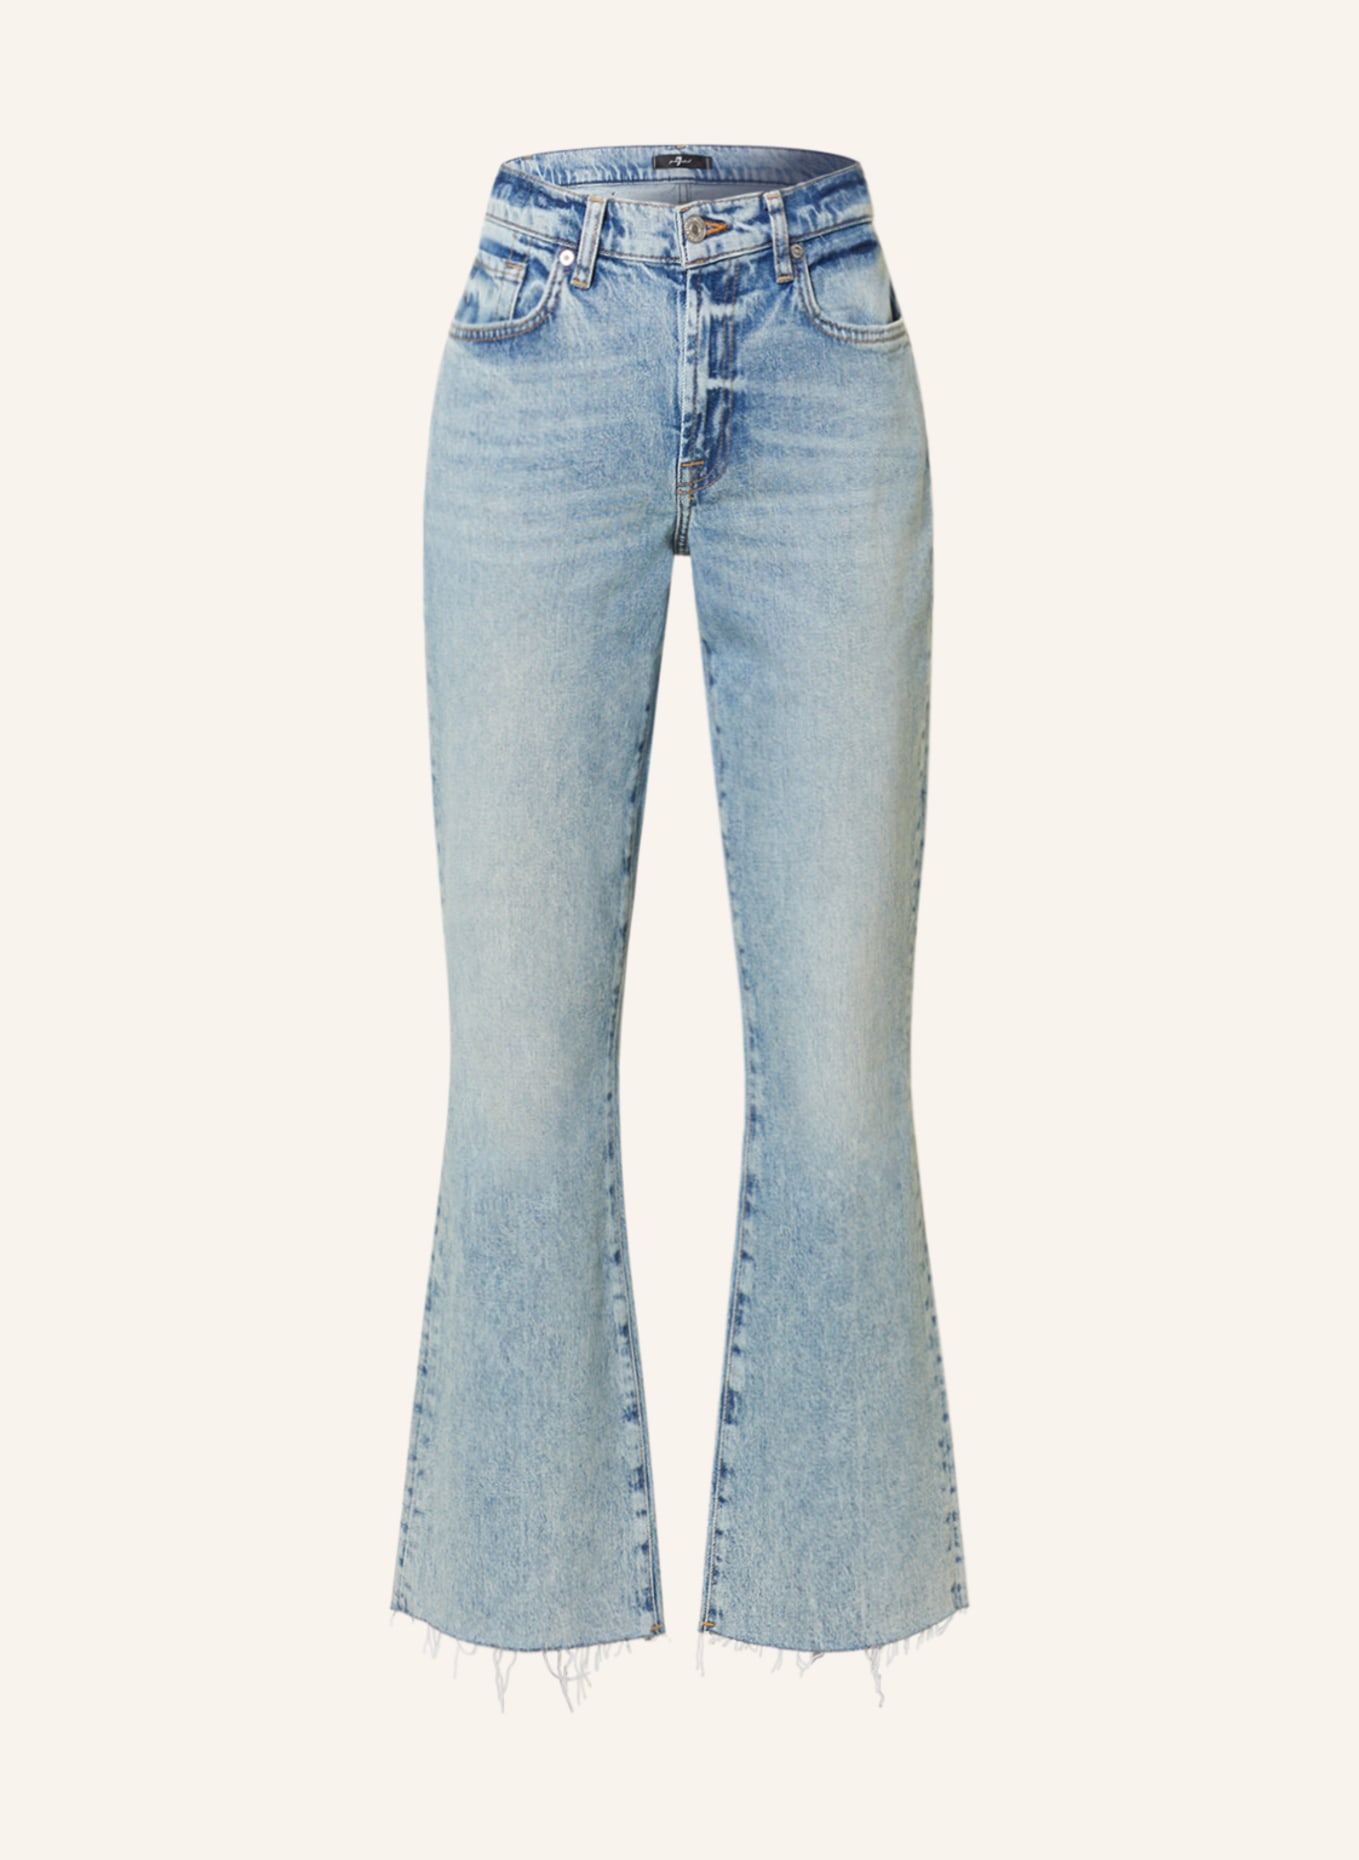 7 for all mankind Bootcut Jeans BETTY, Farbe: OD LIGHT BLUE (Bild 1)